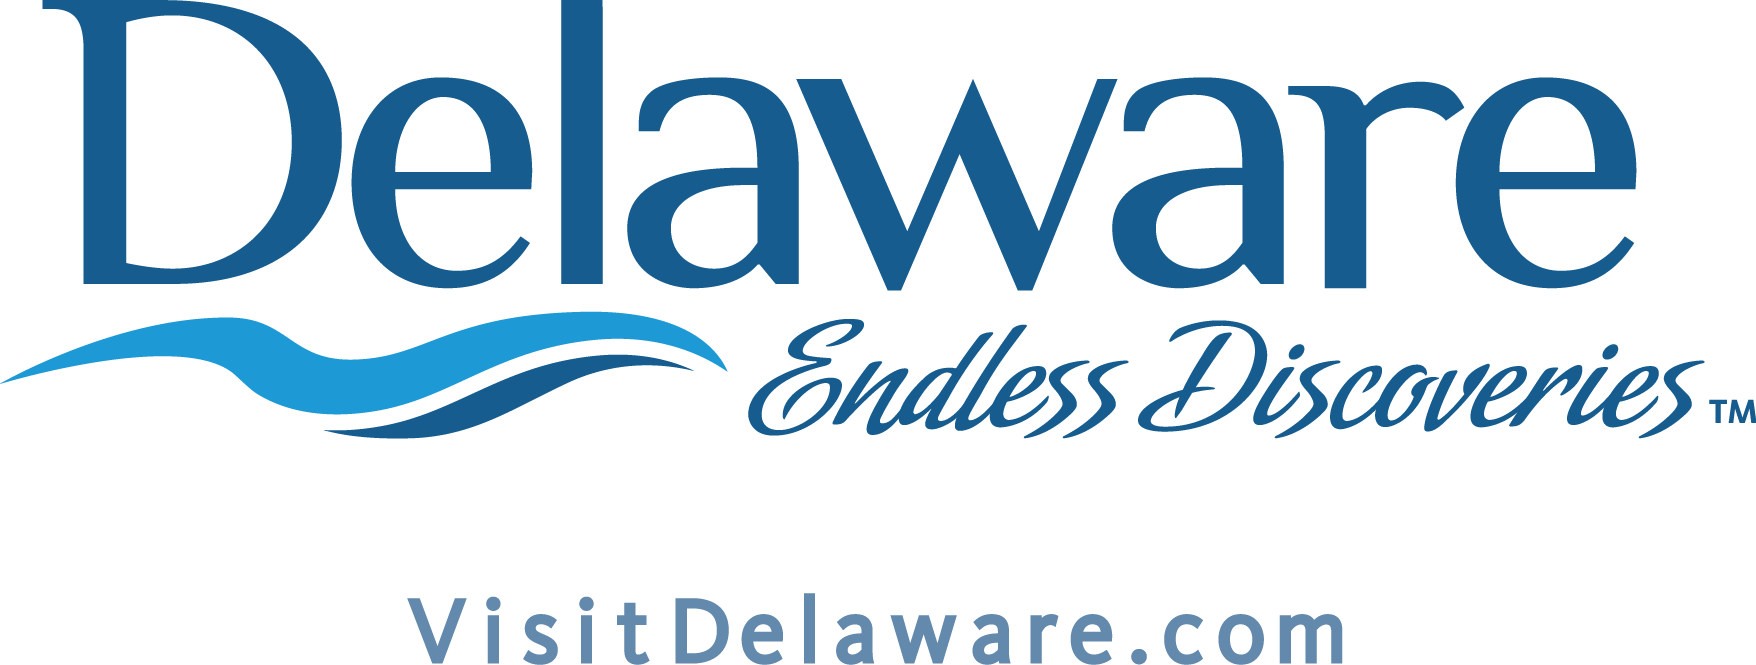 Delaware Endless Discoveries Logo